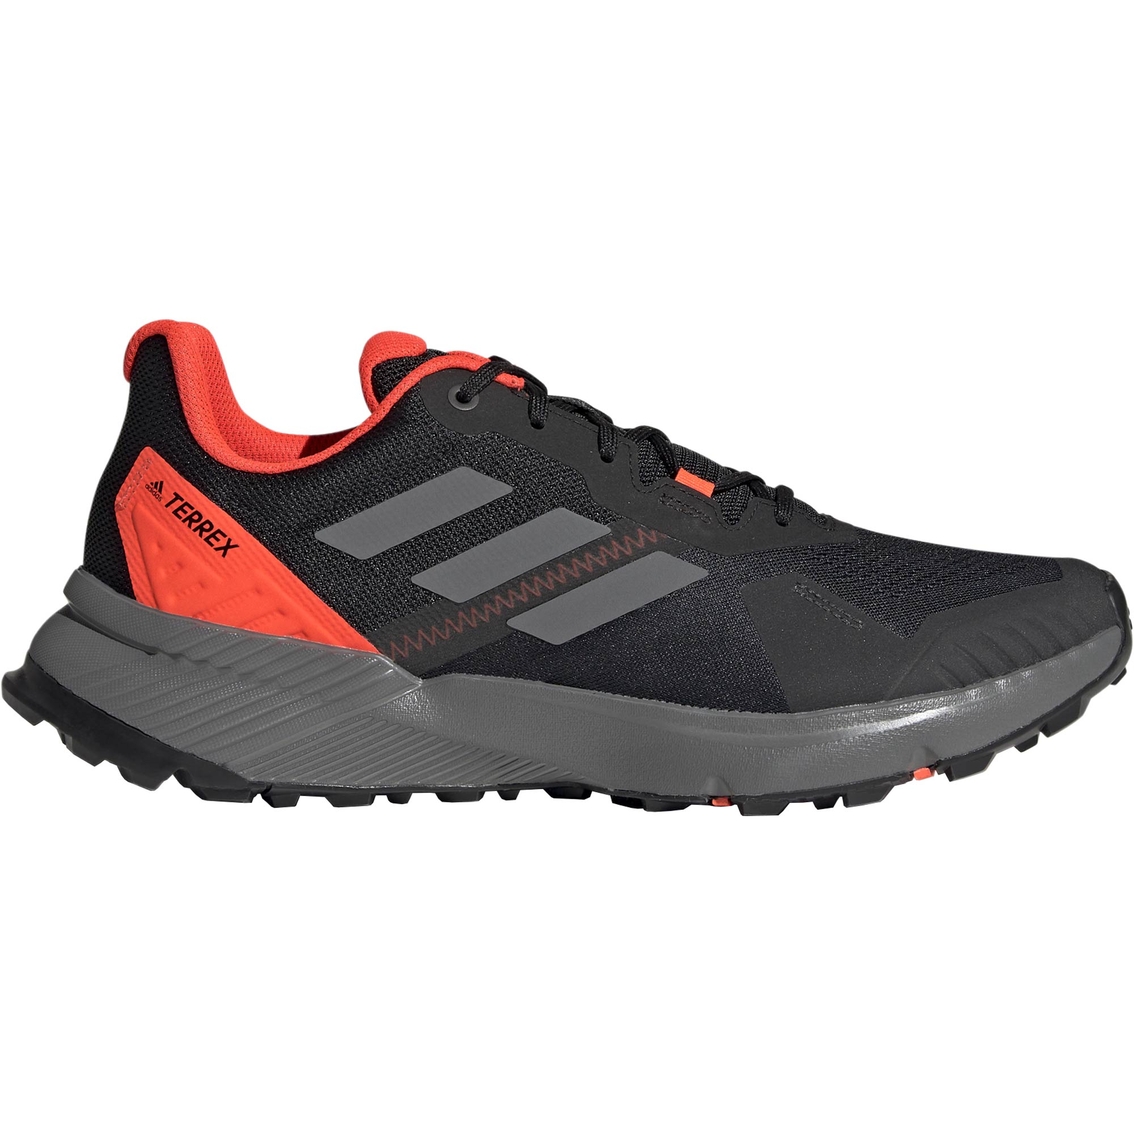 Adidas Terrex Soulstride Trail Running Shoes - Image 2 of 8